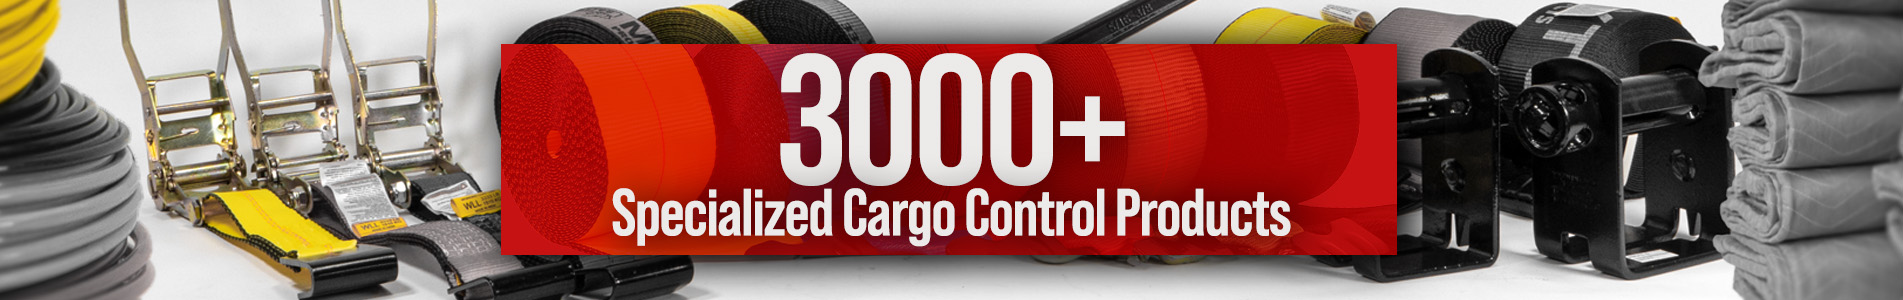 3000+ Specialized Cargo Control Products